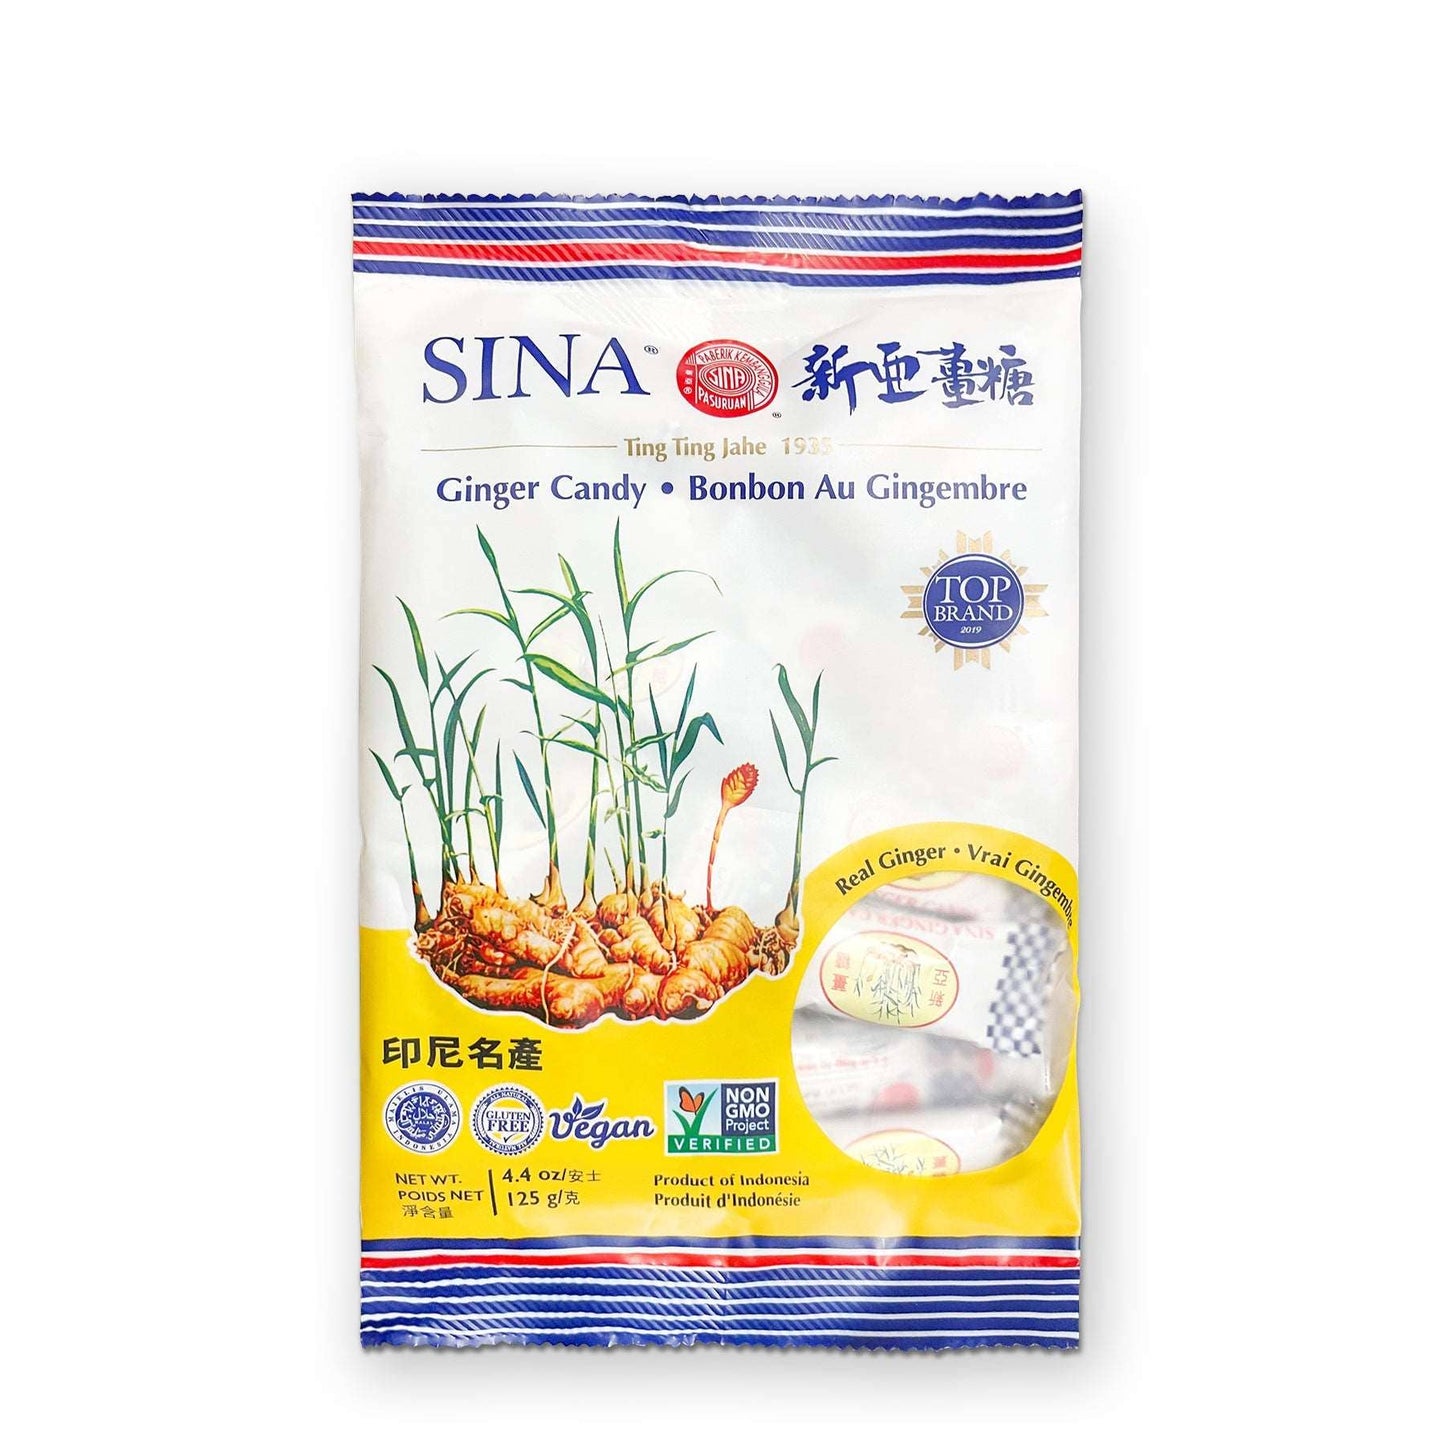 Sina | Ginger Candy